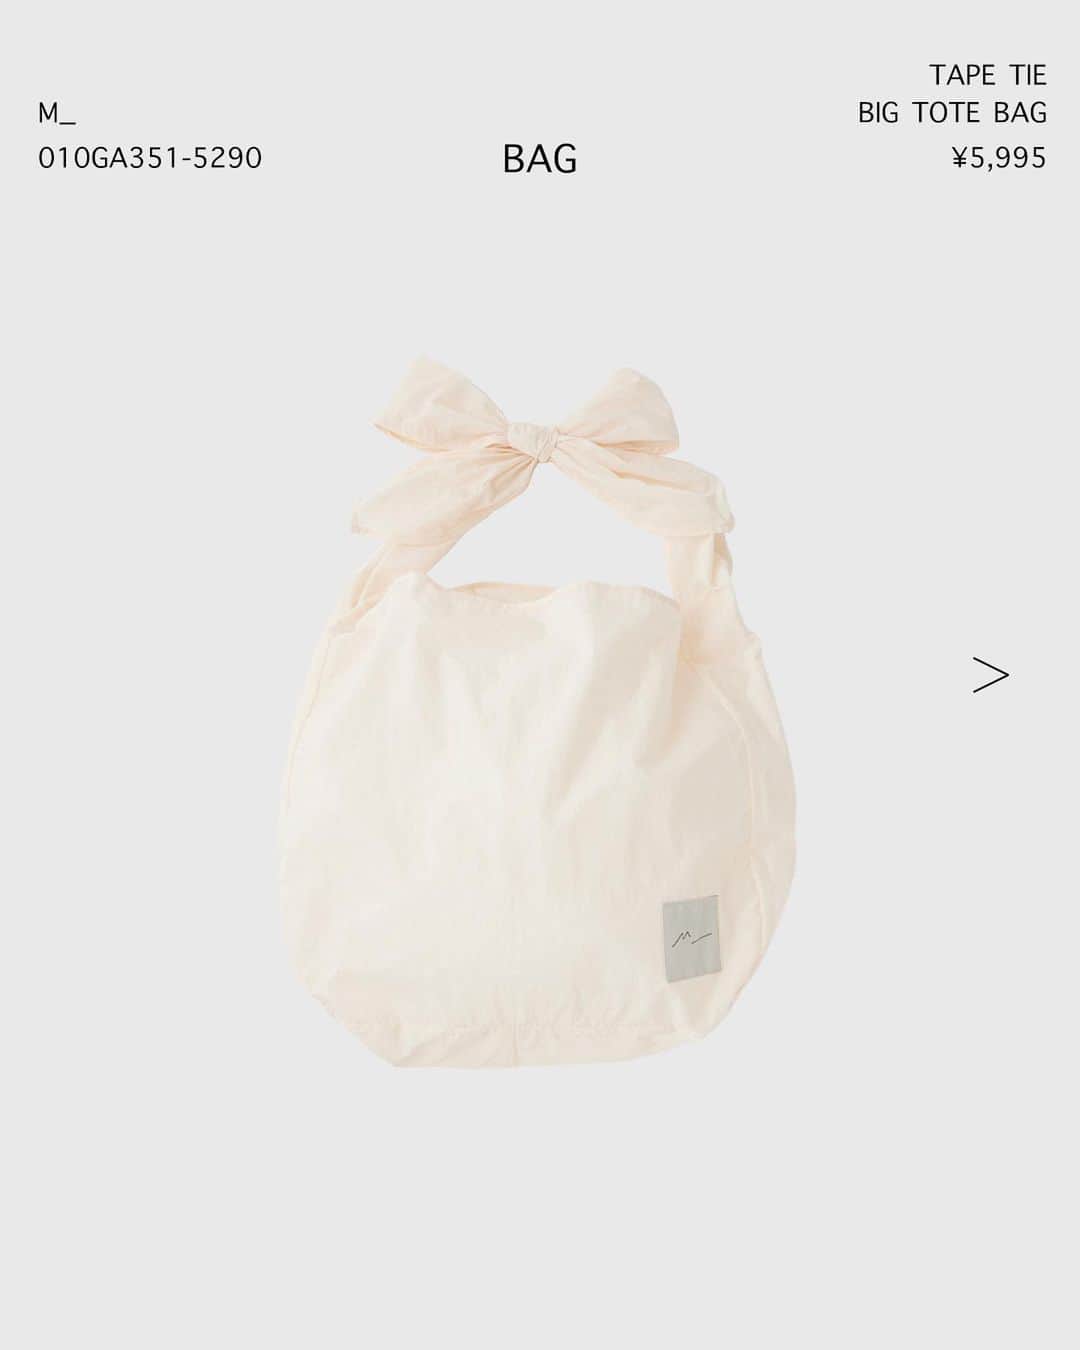 SHEL'TTER WEB STOREさんのインスタグラム写真 - (SHEL'TTER WEB STOREInstagram)「【NEW IN】 - BAG -  ━━━━━━━━━━━━━━━━  【MOUSSY】PAPER LIKE SHOPPERS バッグ ¥6,490 tax in  Color：SLV,BEG No：010GSS51-5360 ※発売中    【M_】TAPE TIE BIG トートバッグ ¥5,995 tax in  Color：WHT,BLK No：010GA351-5290 ※8/4(金)発売予定    【MOUSSY】MOUSSY F/L SHOPPER バッグ ¥3,278 tax in  Color：BLK No：010GAT51-5870 ※発売中   【RODEO CROWNS WIDE BOWL】パッチワーク DENIM TOTE ¥6,600 tax in  Color：BLU,BLK No：420GAY55-034M ※発売中  気になるアイテムは画像をタップまたは  プロフィールのサイトURLをクリック✔  ━━━━━━━━━━━━━━━━  #SHELTTERWEBSTORE #SWS   #MOUSSY #RODEOCROWNSWIDEBOWL #M_ #M_MOUSSY  #newin #2023ss #summer2023 #autumn2023 #summerbag  #totebag #fallbag #logobag #denimbag #新作 #トートバッグ #ロゴバッグ #ショッパーバッグ #デニムトート #デニムトートバッグ #デニムバッグ #ロゴトート #夏バッグ #秋バッグ #ビッグトート」8月3日 19時01分 - sheltterwebstore